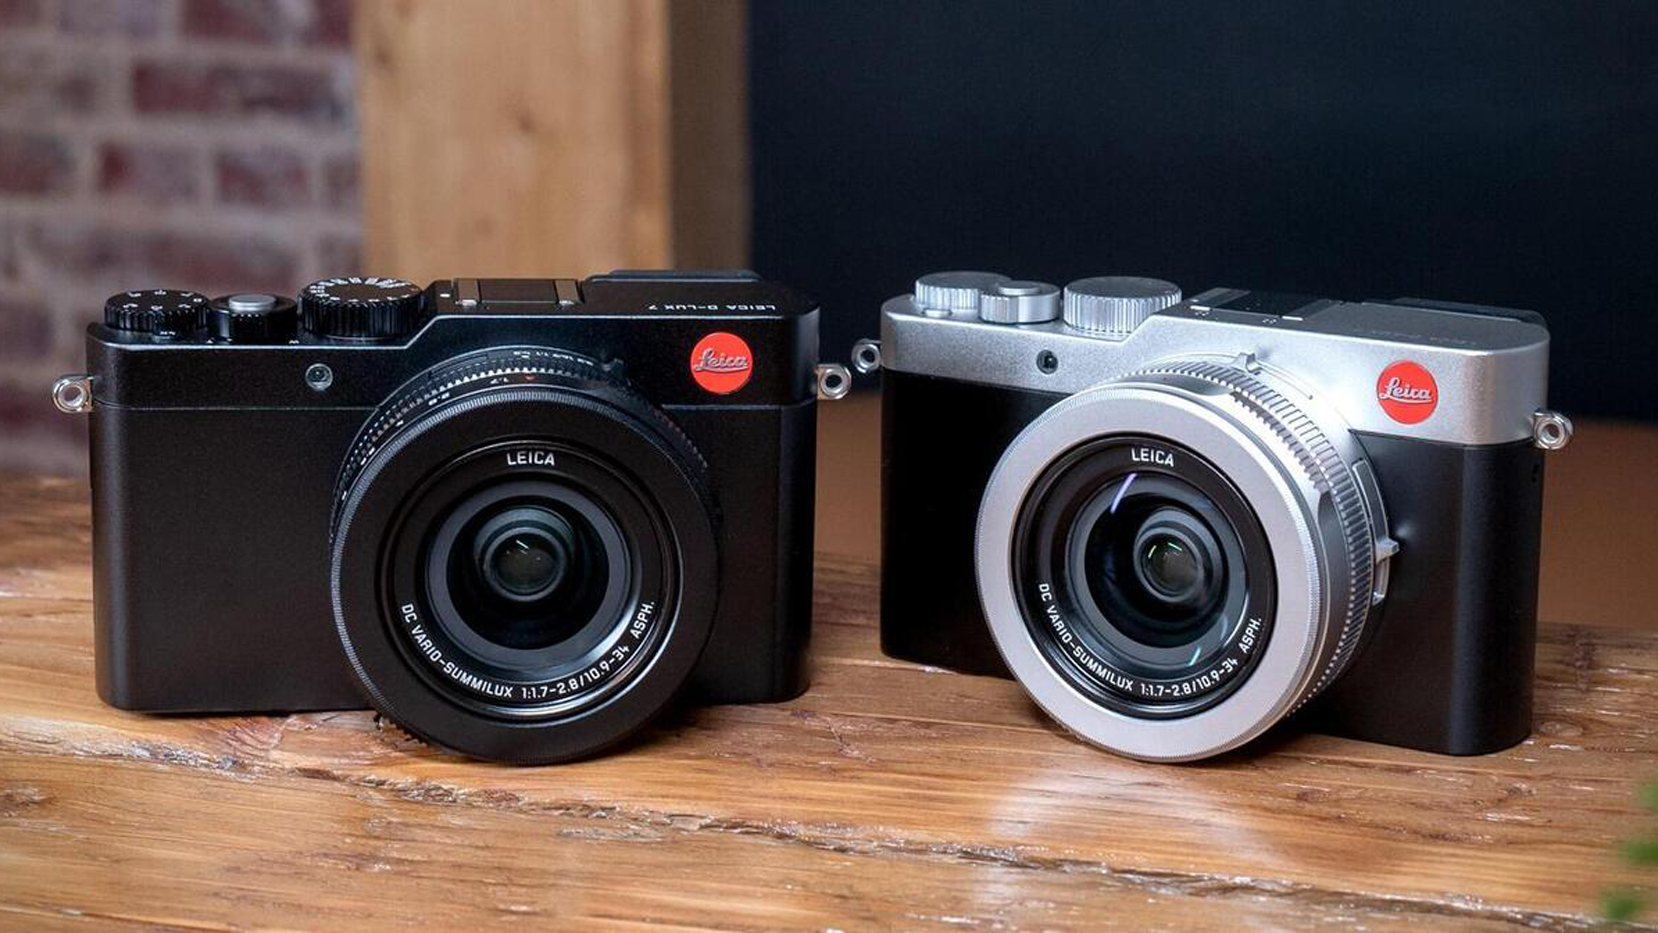 Can anyone tell me how much this is worth? It's a Leica D-Lux 3